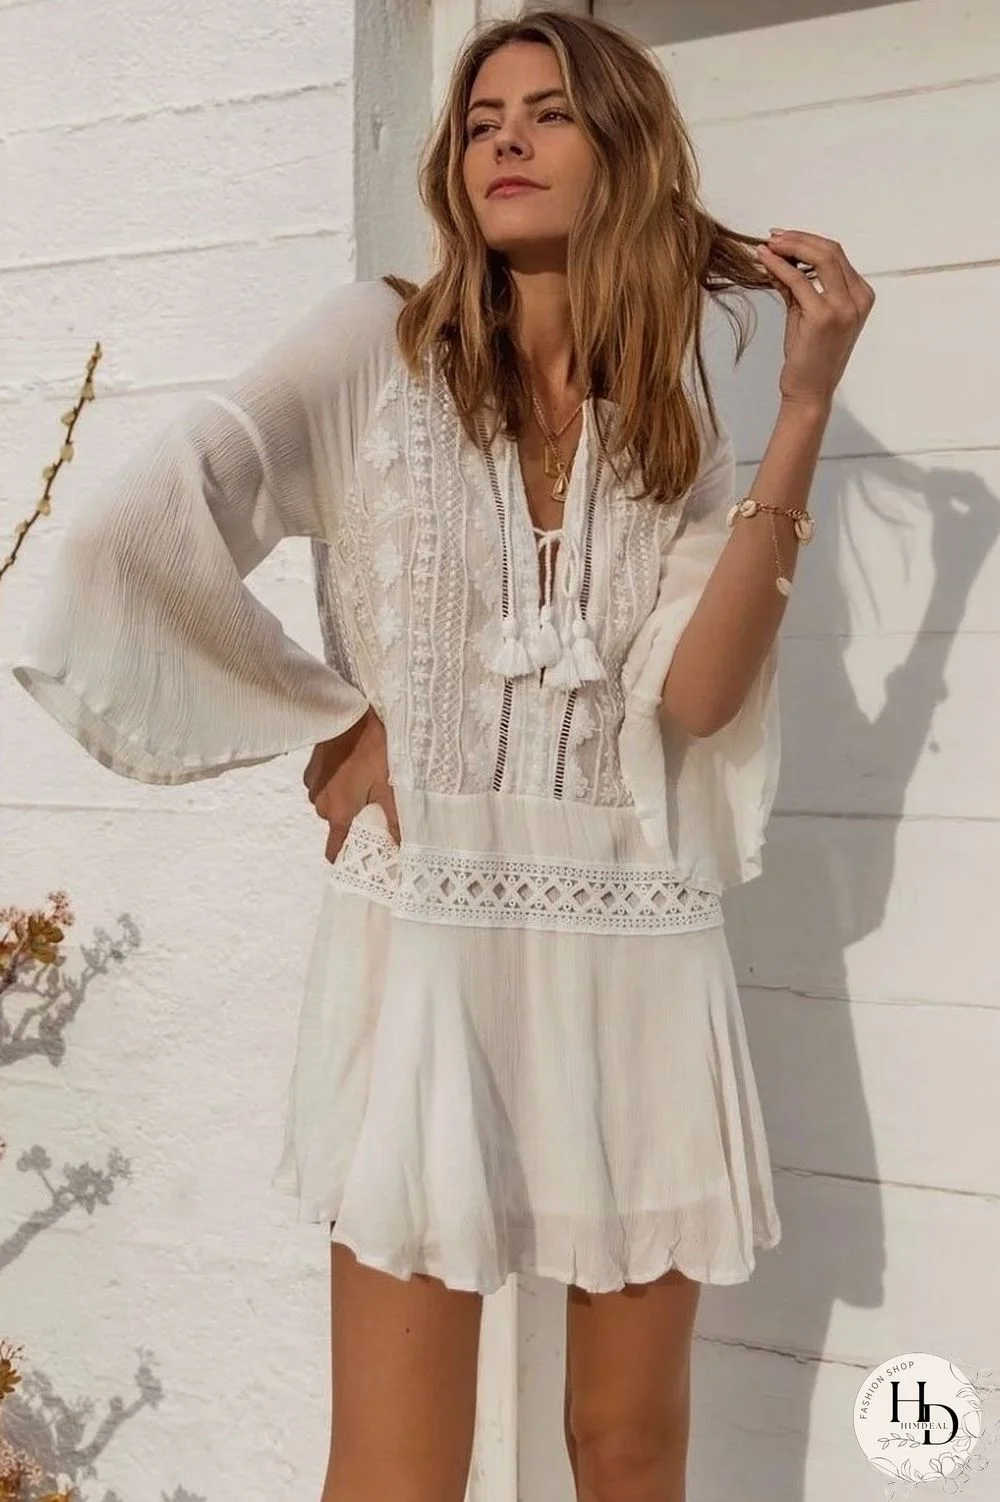 Exquisite Lace Crochet Sleeved Sheer Chiffon Cover Up